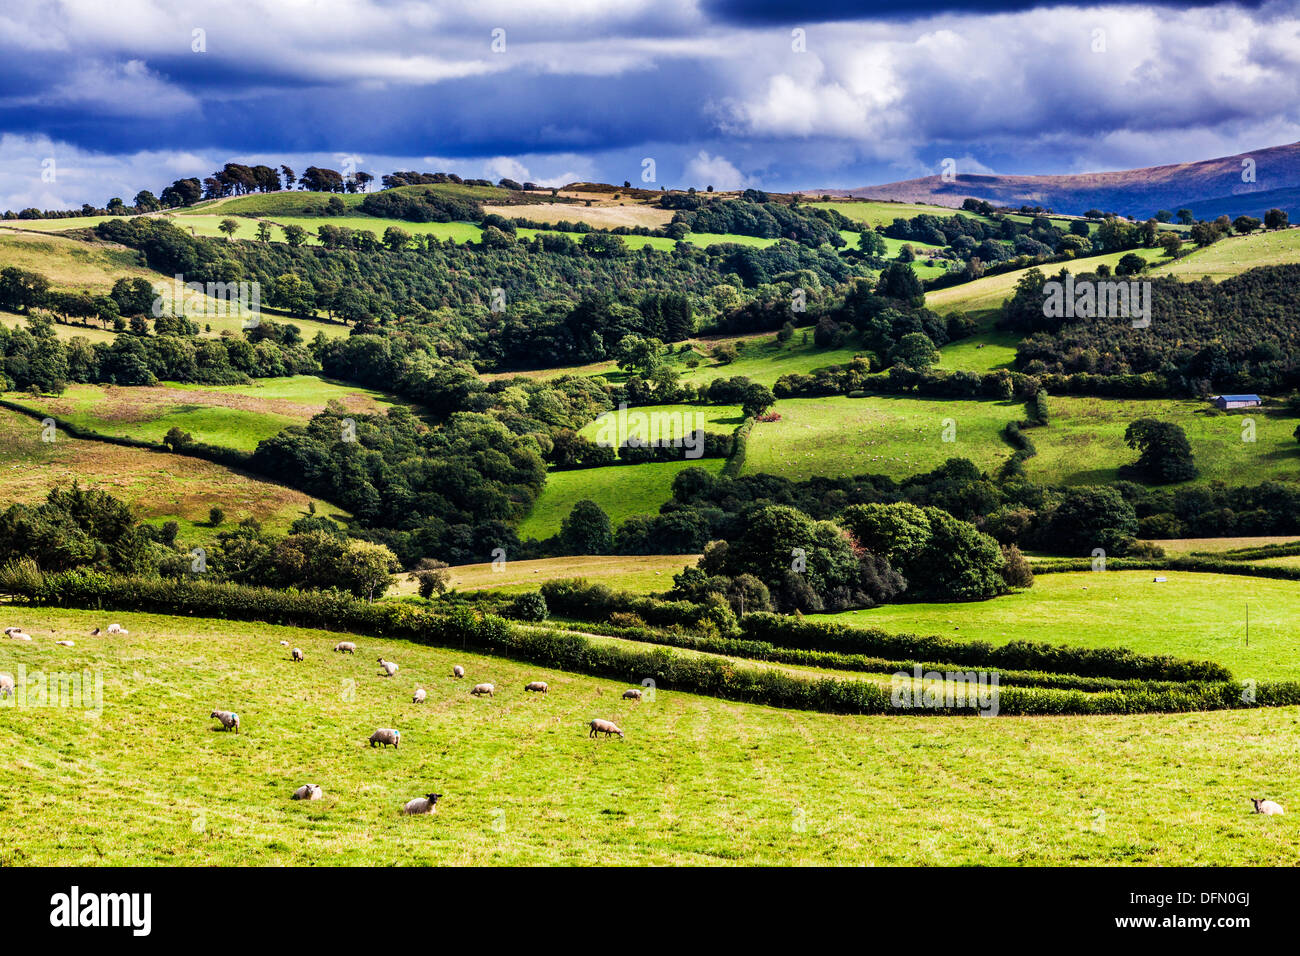 A stormy, showery summer's day in the Brecon Beacons National Park, Wales. Stock Photo